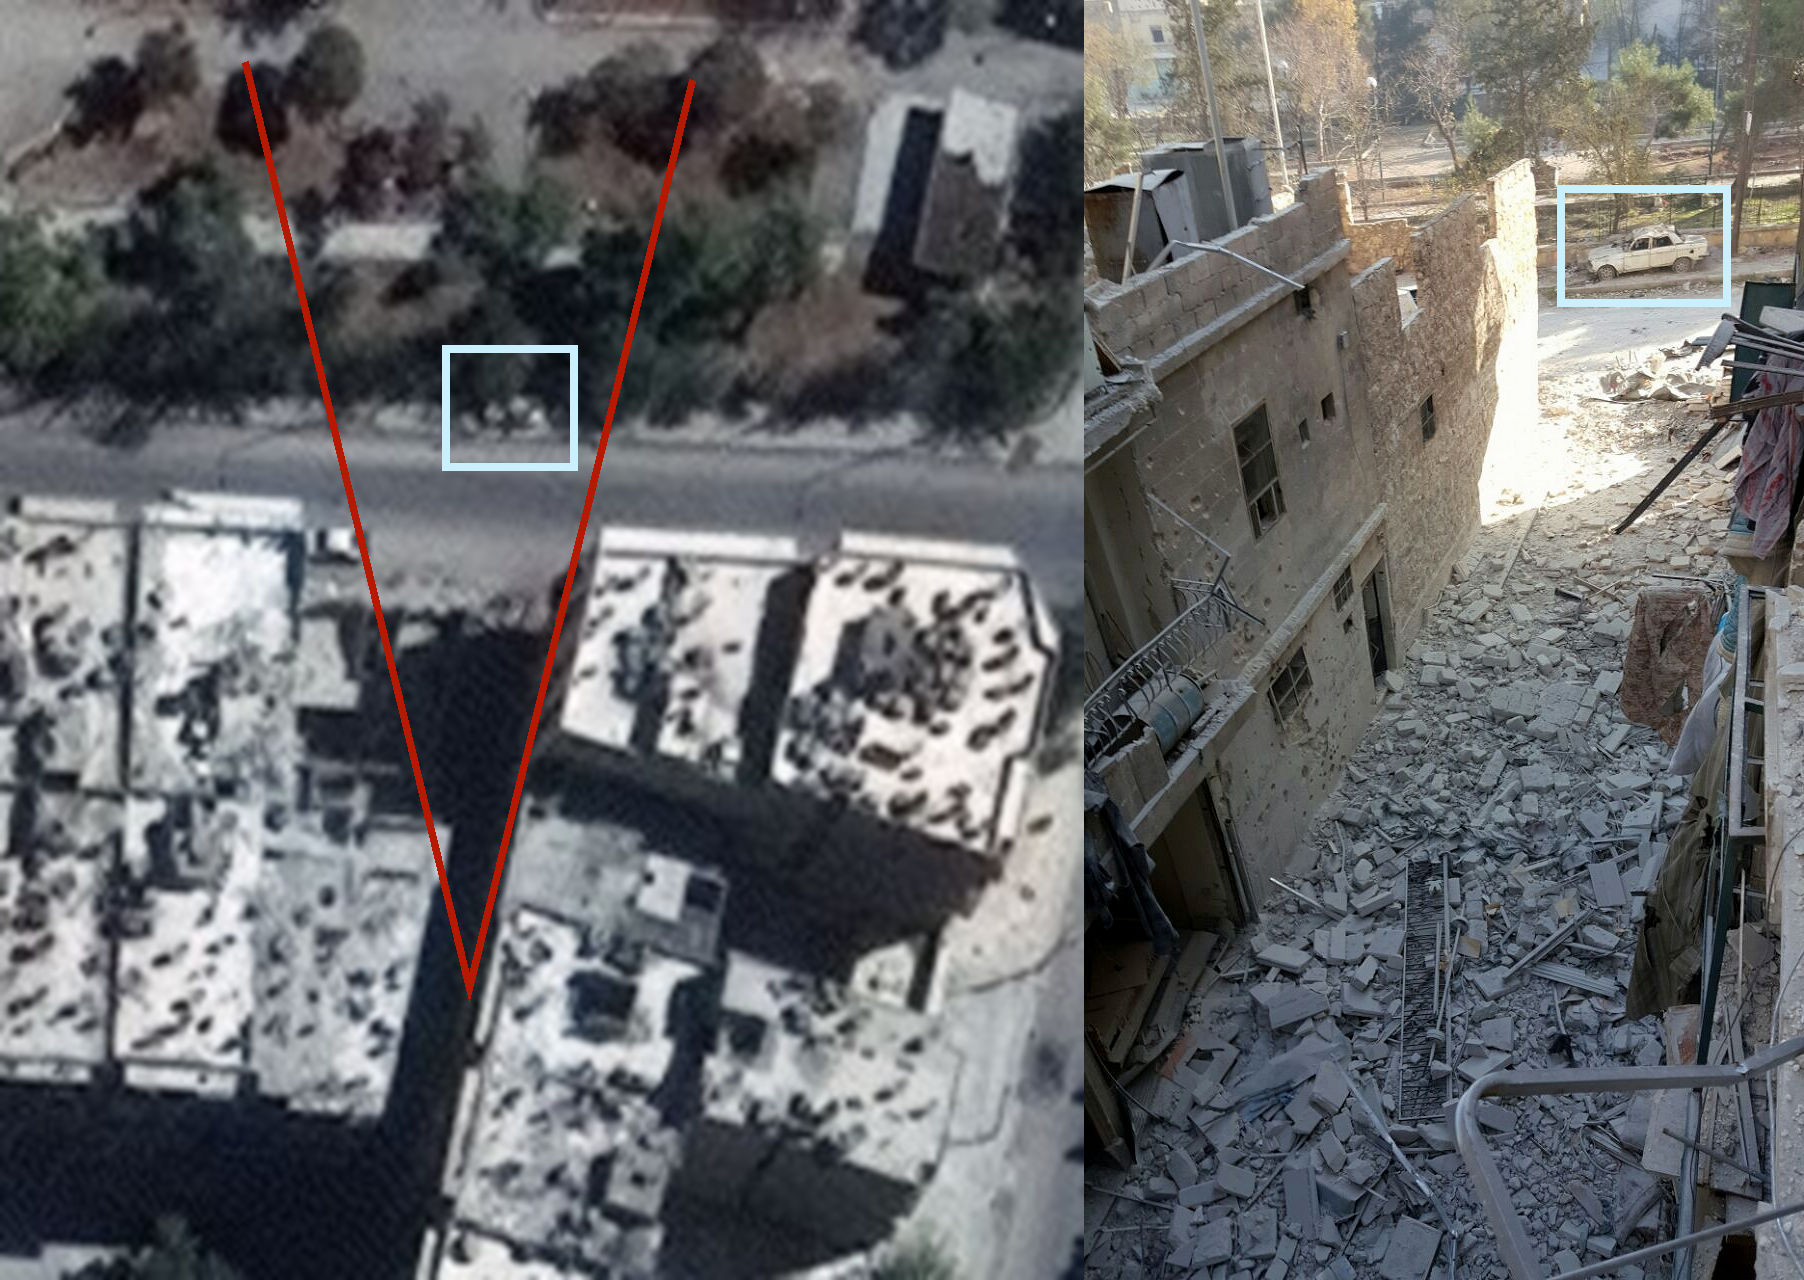 Image 21: Geolocation of bombed house